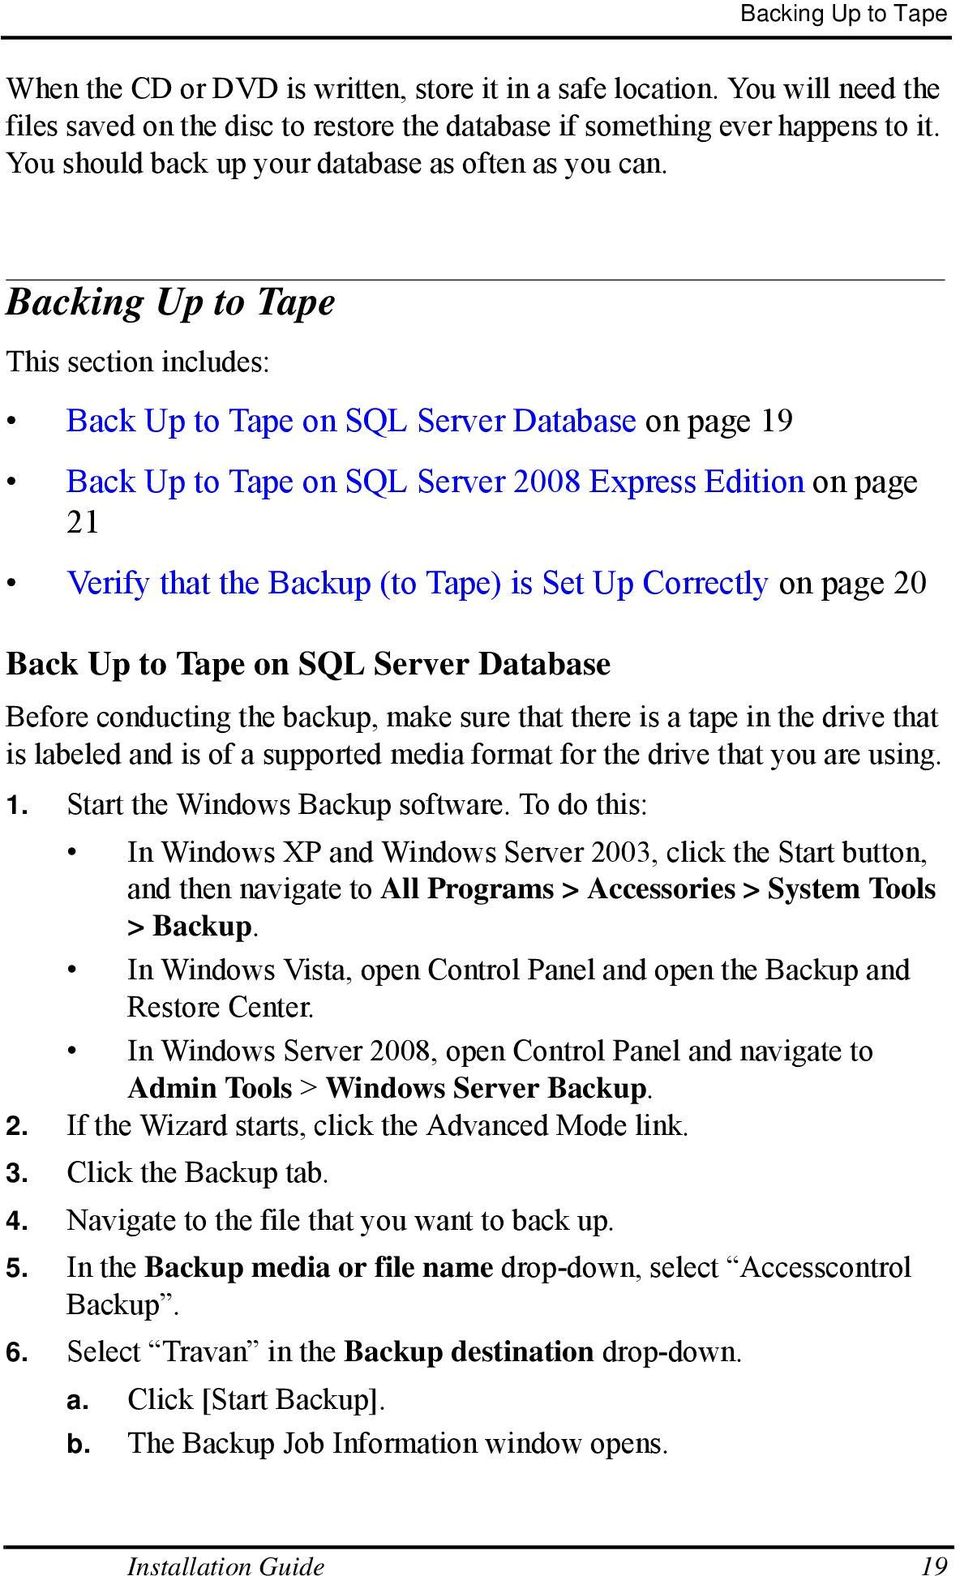 Backing Up to Tape This section includes: Back Up to Tape on SQL Server Database on page 19 Back Up to Tape on SQL Server 2008 Express Edition on page 21 Verify that the Backup (to Tape) is Set Up